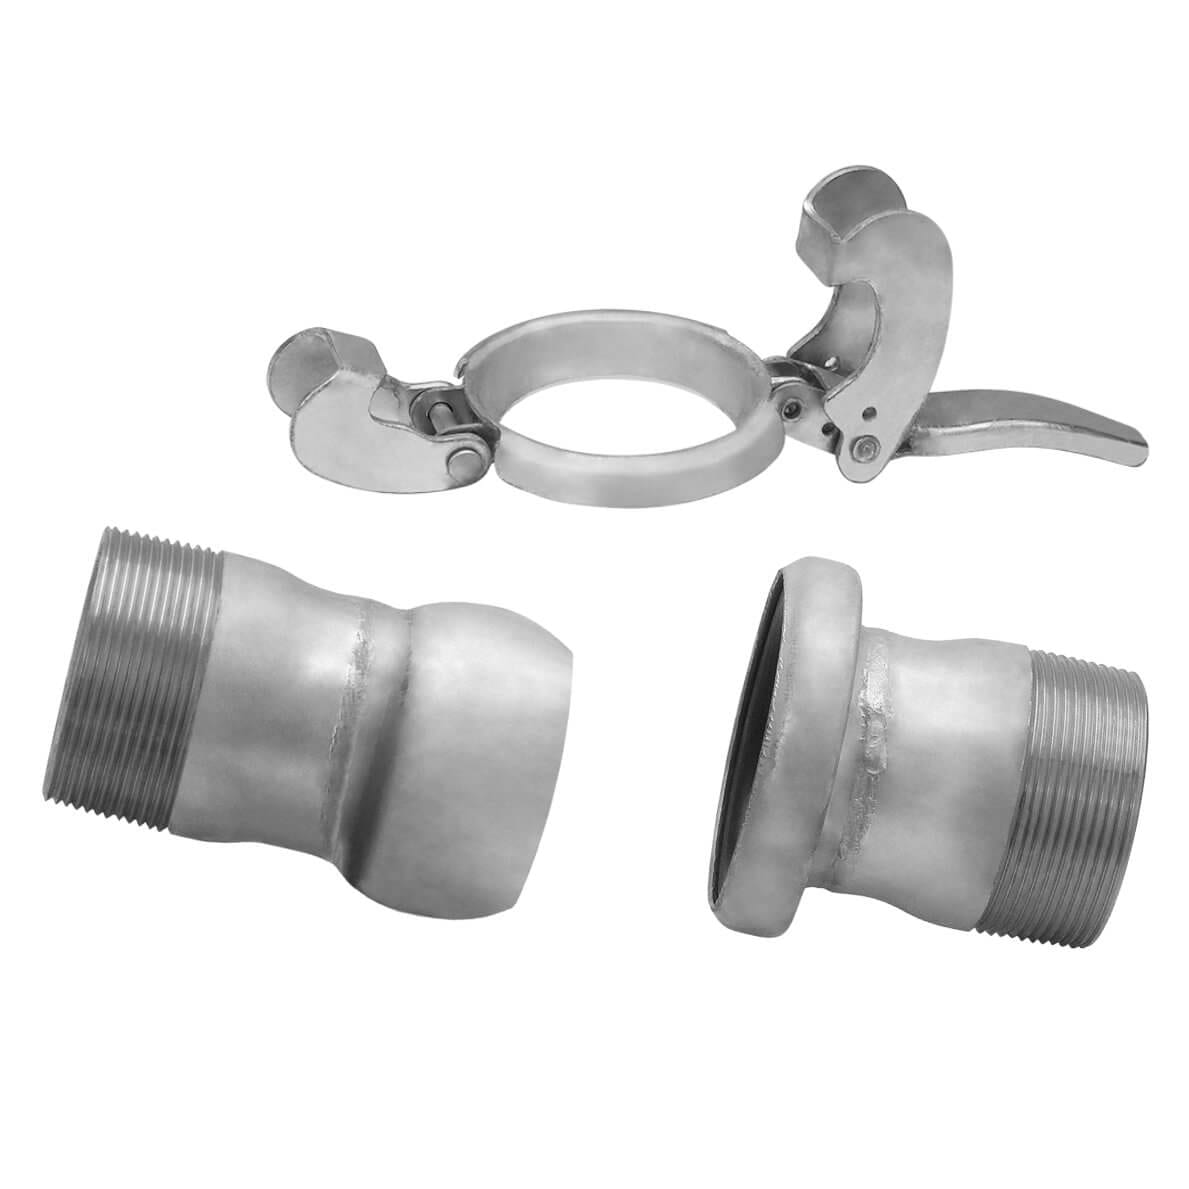 Male 4" Bauer Type Lever Lock Coupling for 4" Hose Closure Ring or Set Female